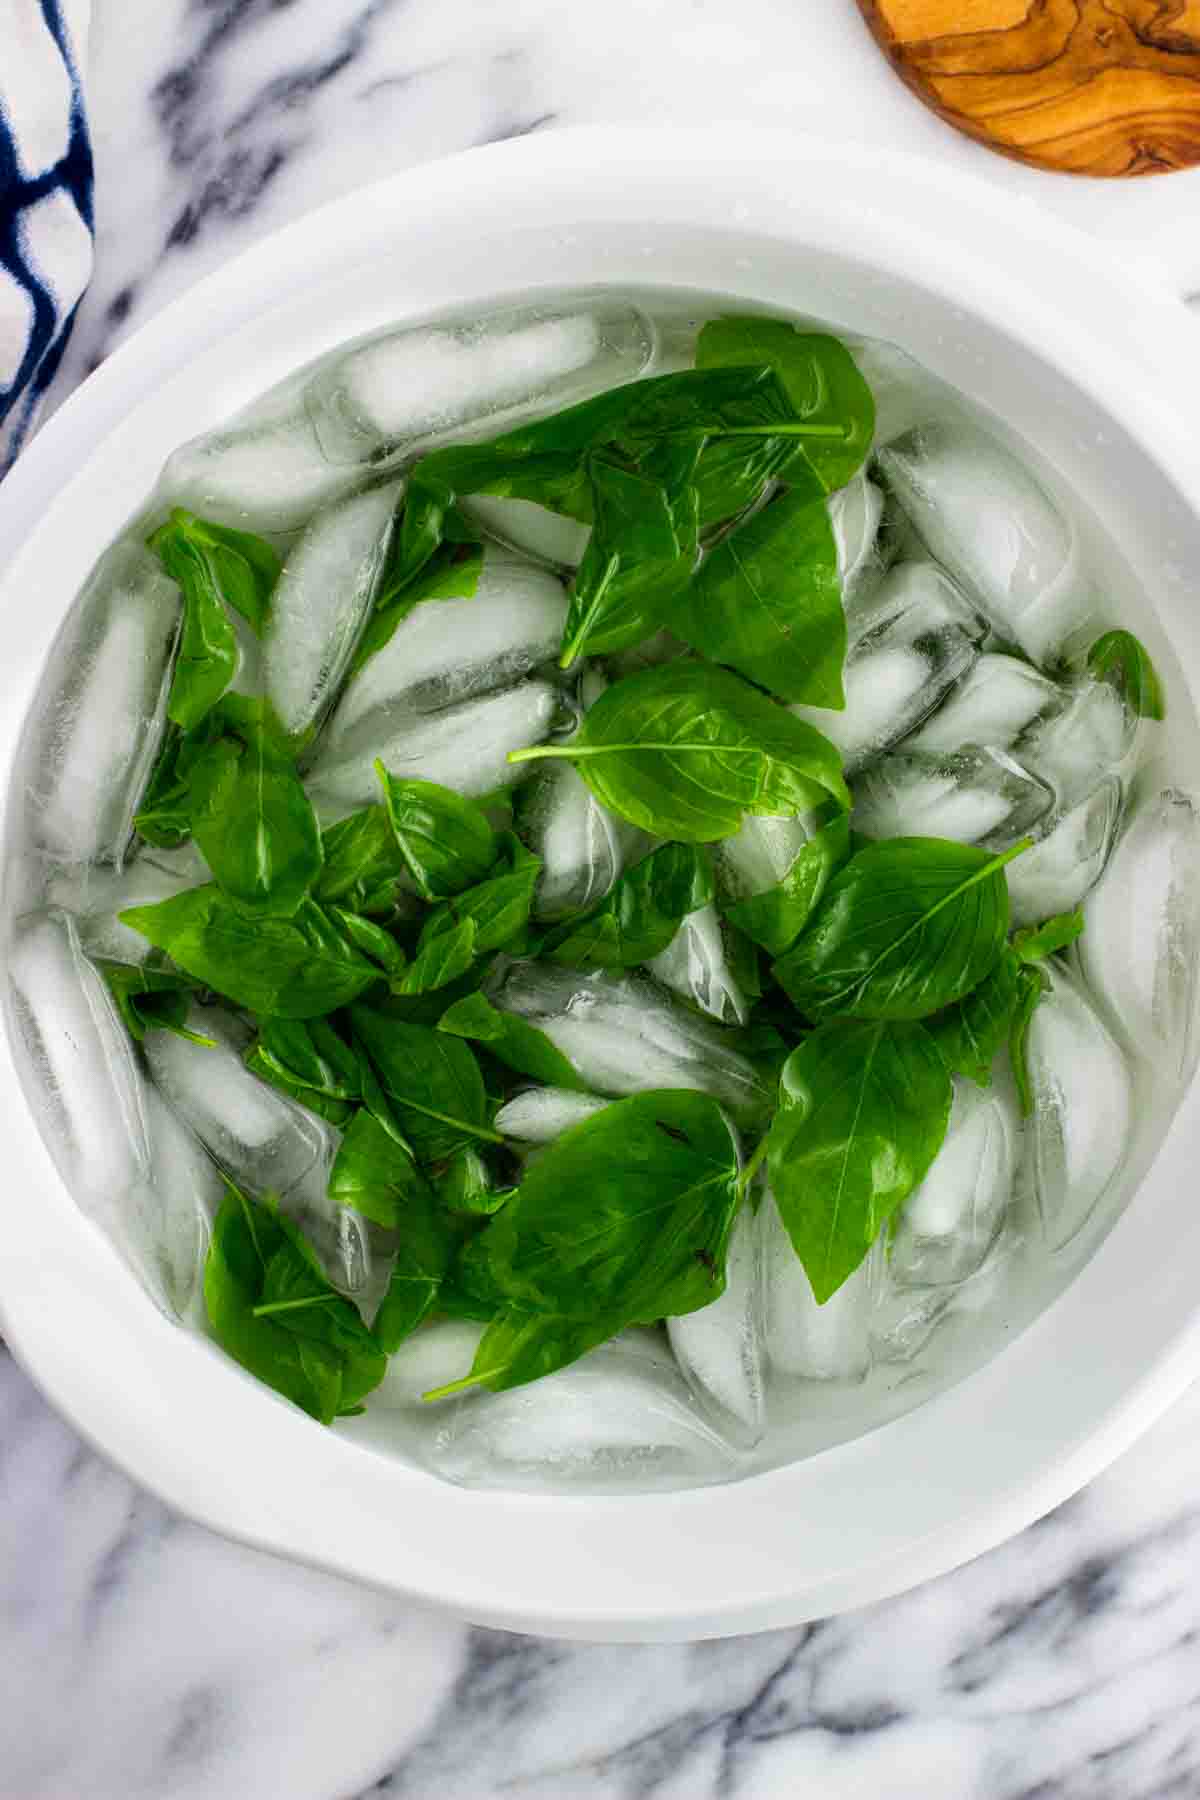 Blanched basil leaves in a large bowl of ice water.